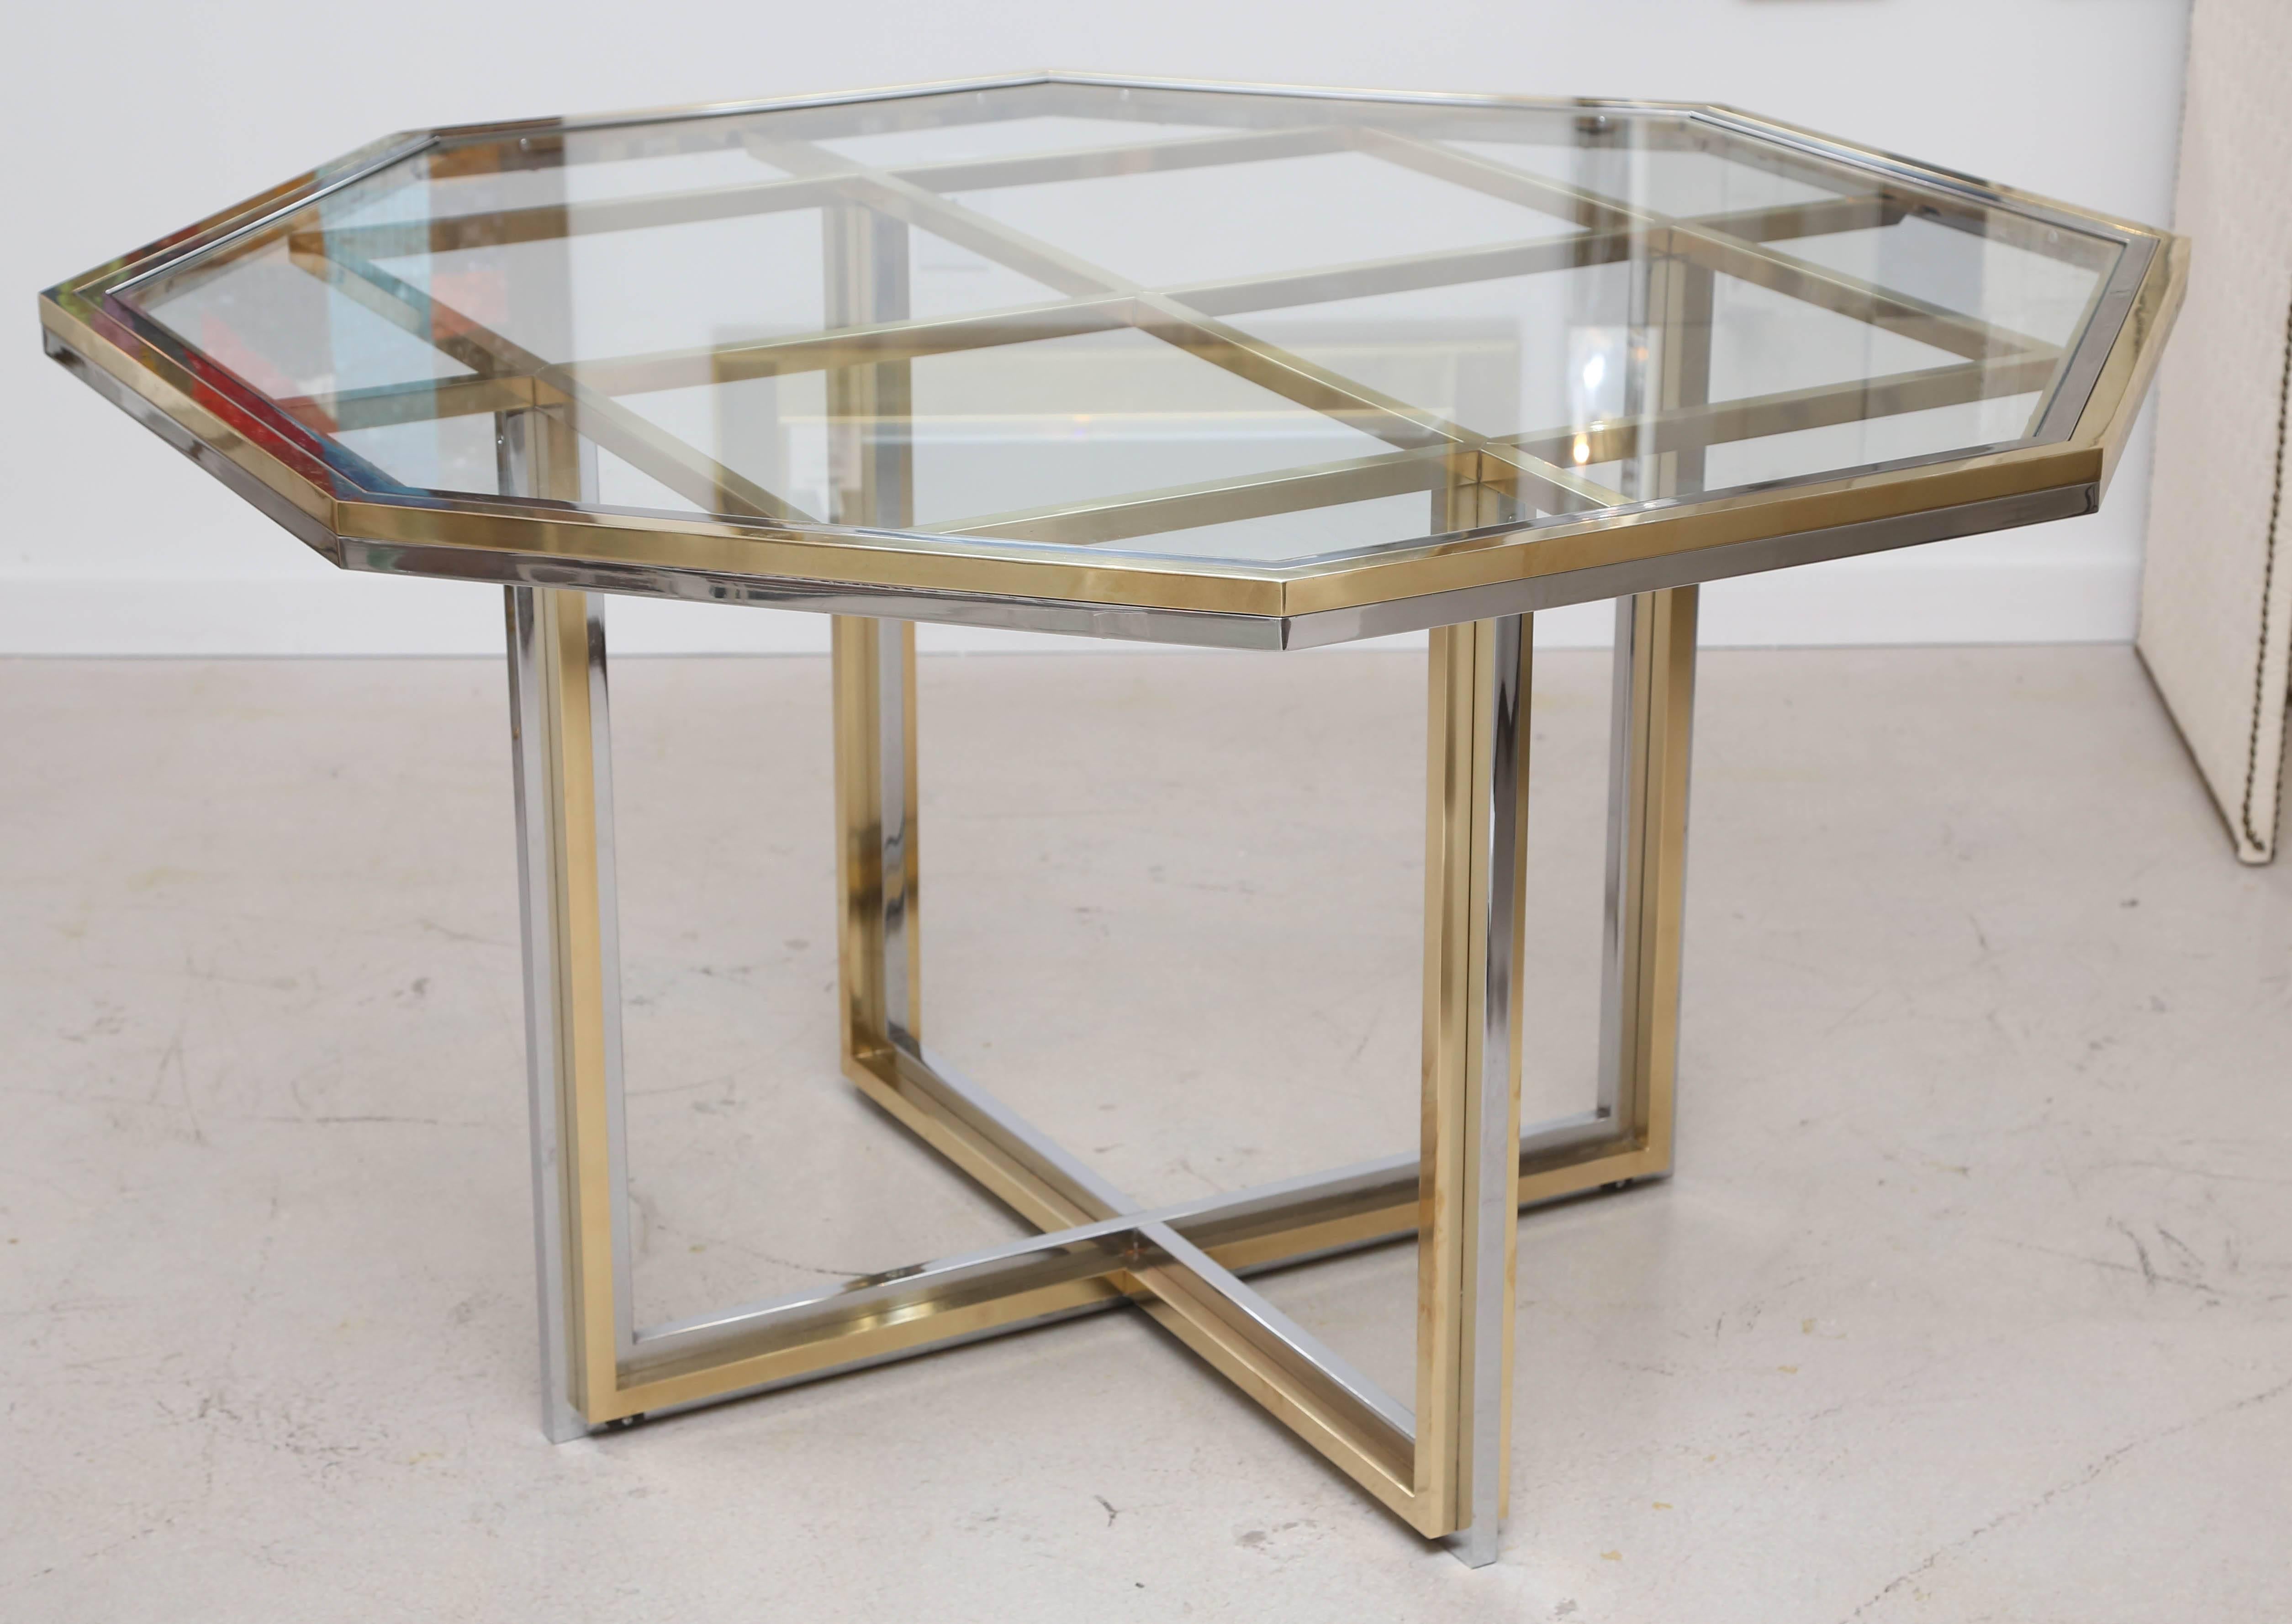 Octagonal mixed metal dining table with glass top by Romeo Rega. The table may also be used as a centre.
Measures: 51 L x 51 W x 29.25 H.